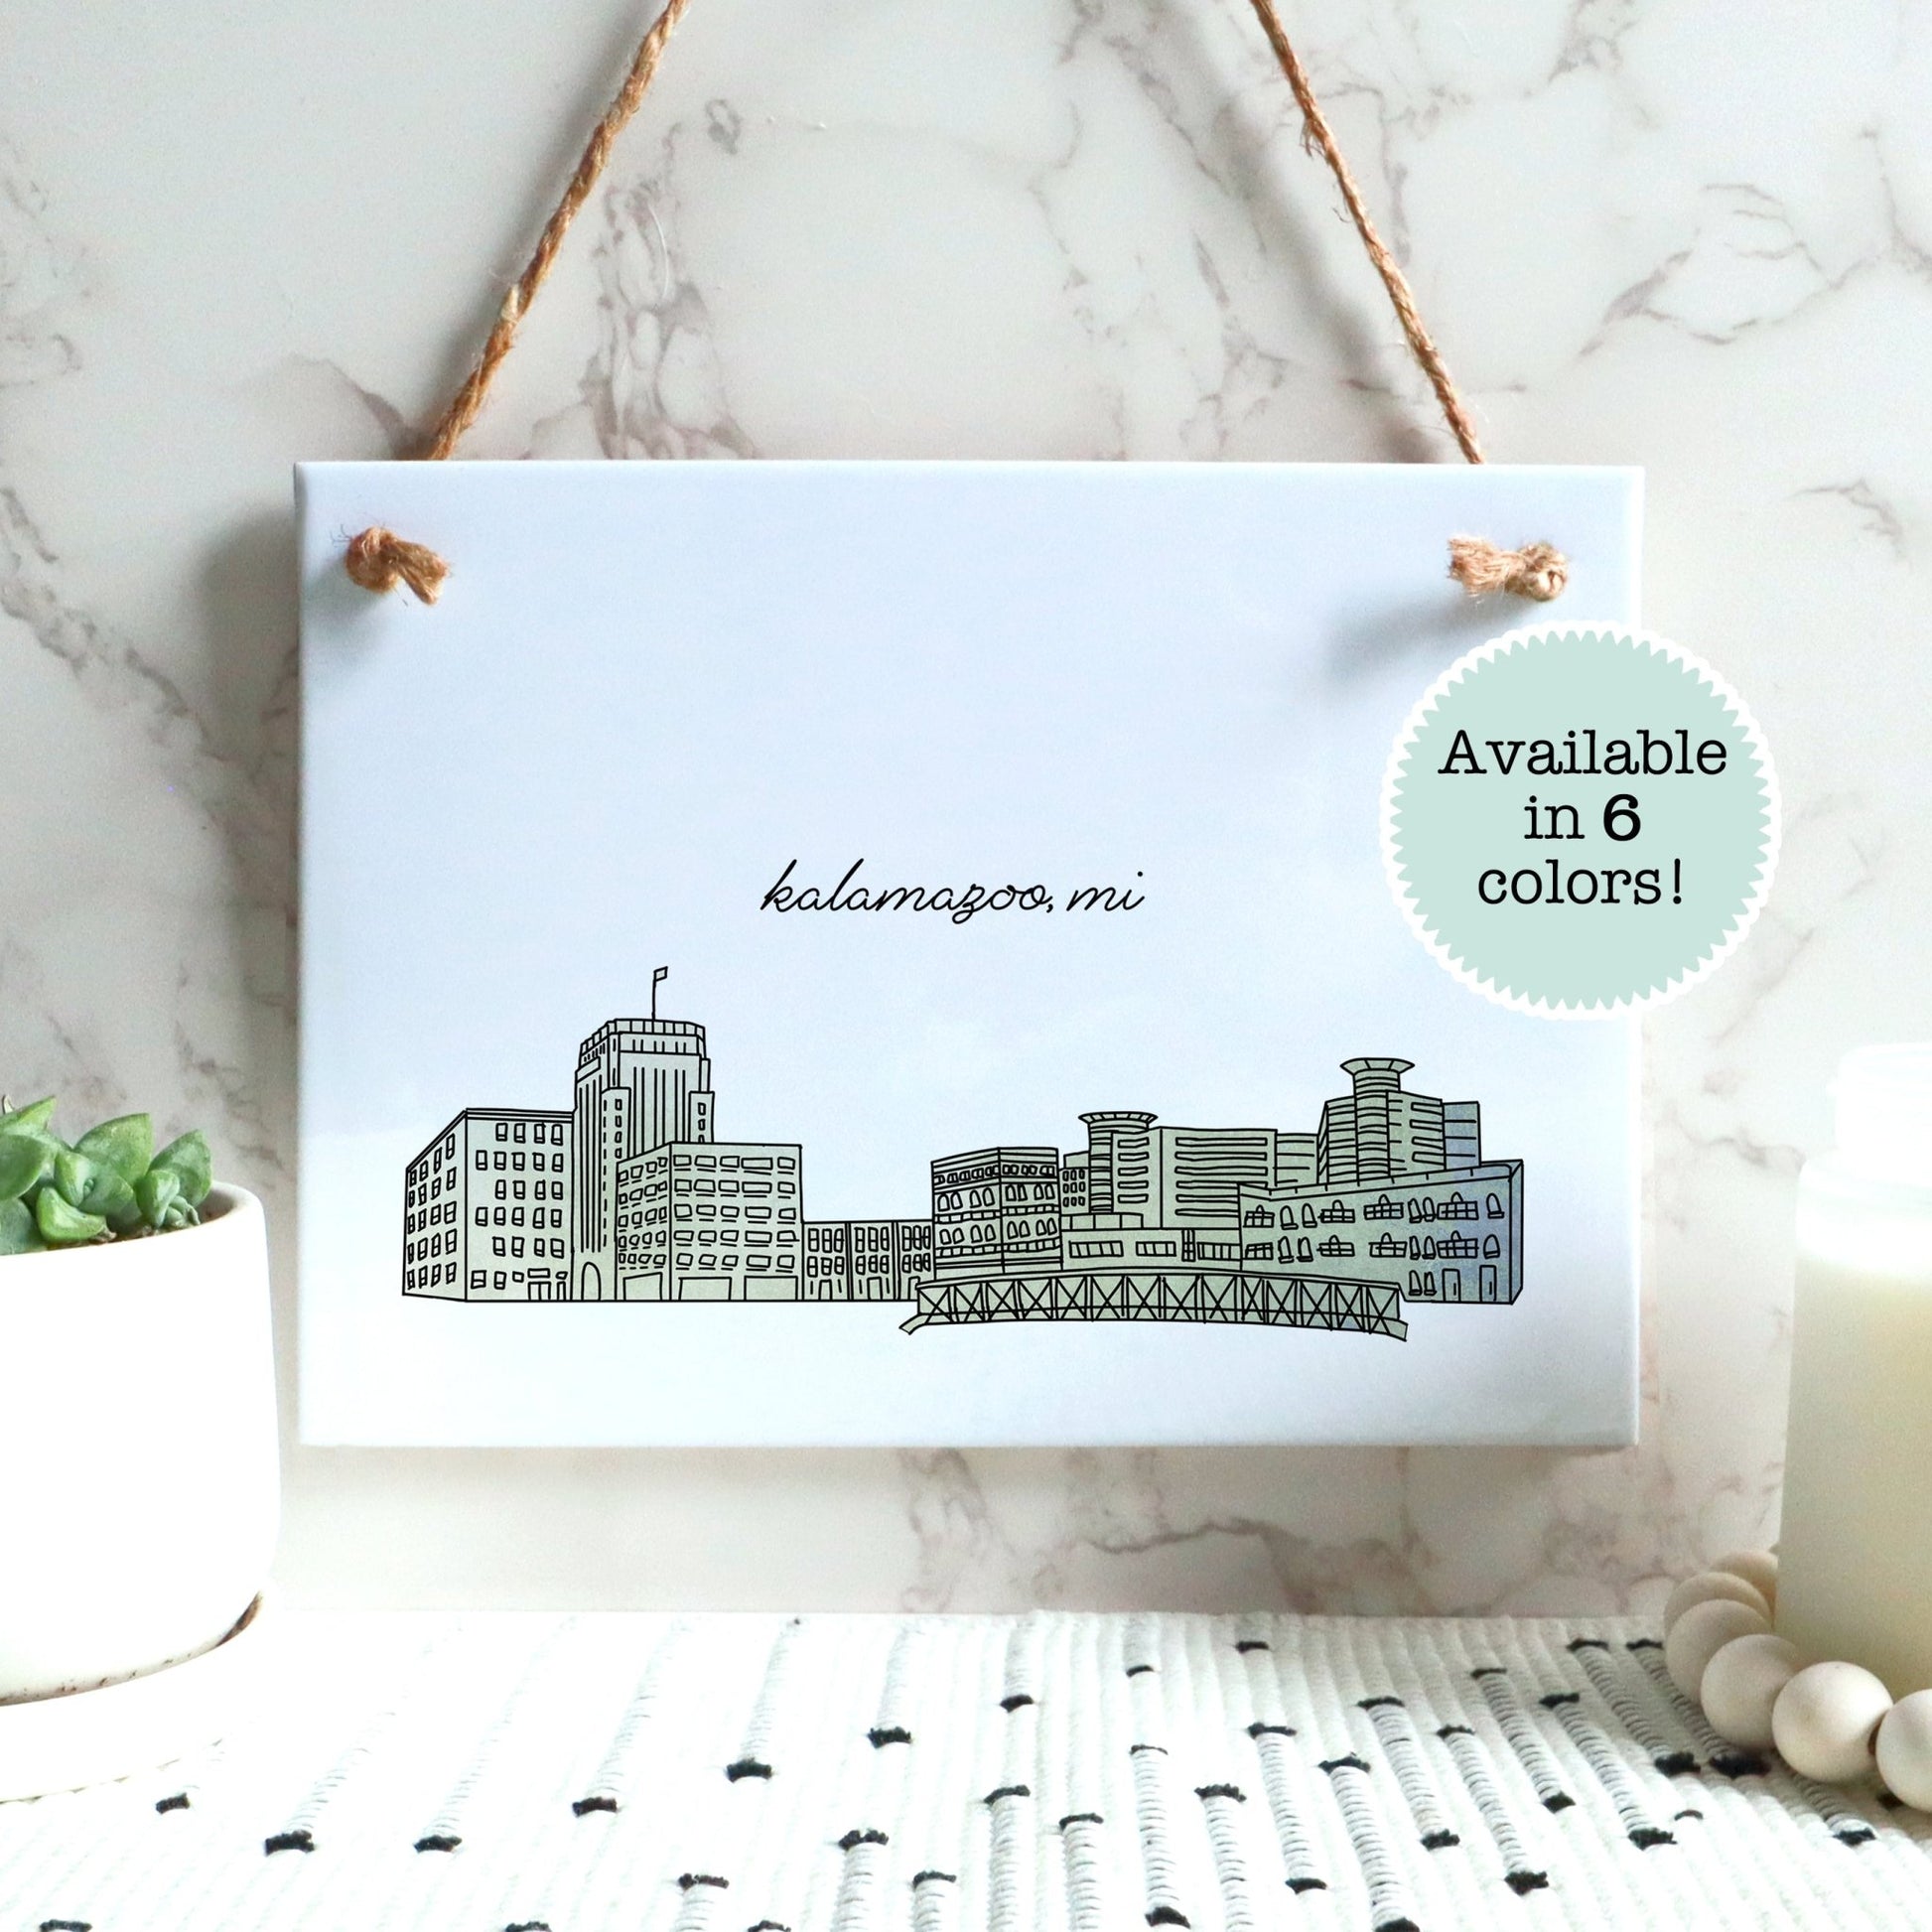 A Kalamazoo MI souvenir of a drawing of the city skyline on a rectangle tile sign, hanging on a wall - in the color green